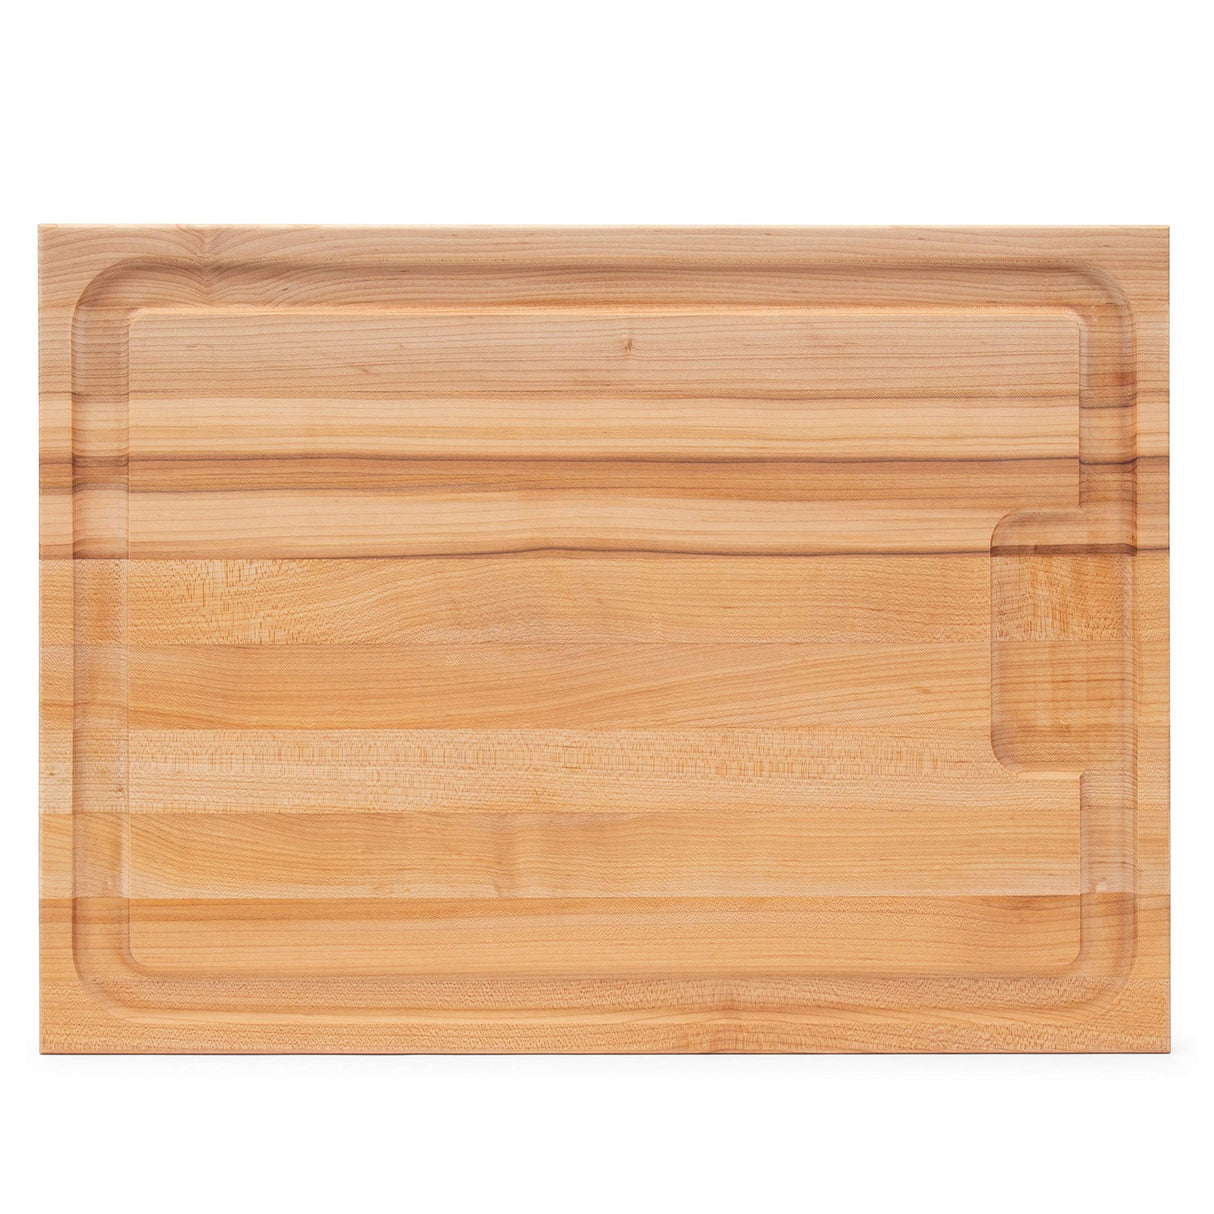 John Boos AUJUS Au Jus Maple Wood Cutting Board for Kitchen Prep, 18 x 24 Inches, 1.5 Inches Thick Edge Grain Charcuterie Block with Juice Grooves 24X18X1.5 MPL-EDGE GR-AU JUS BRD